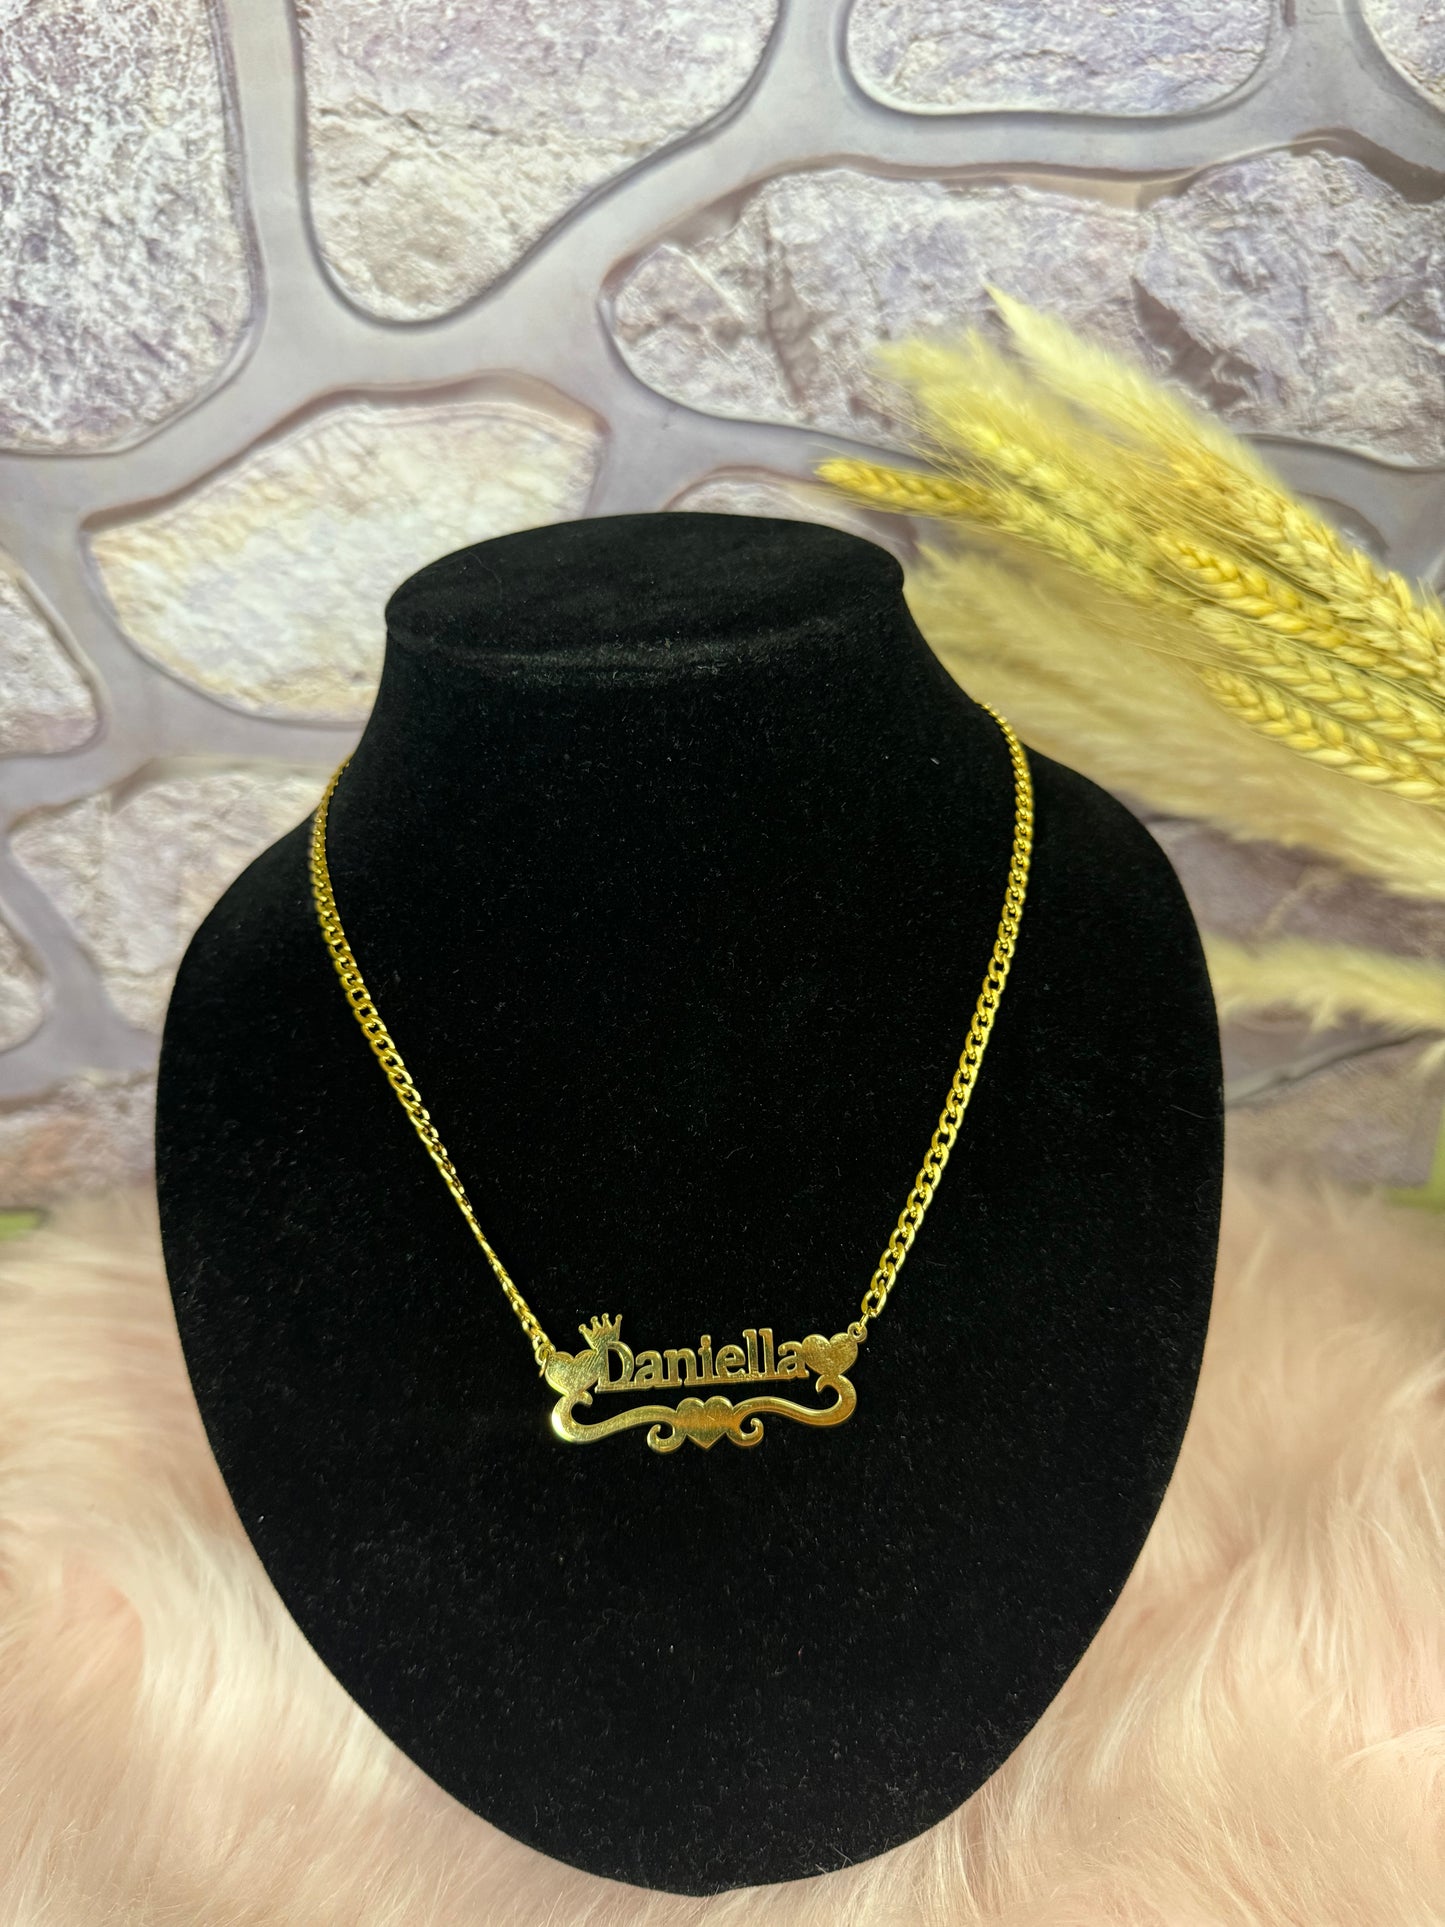 Daniella instock name necklace - stainless steel gold plated